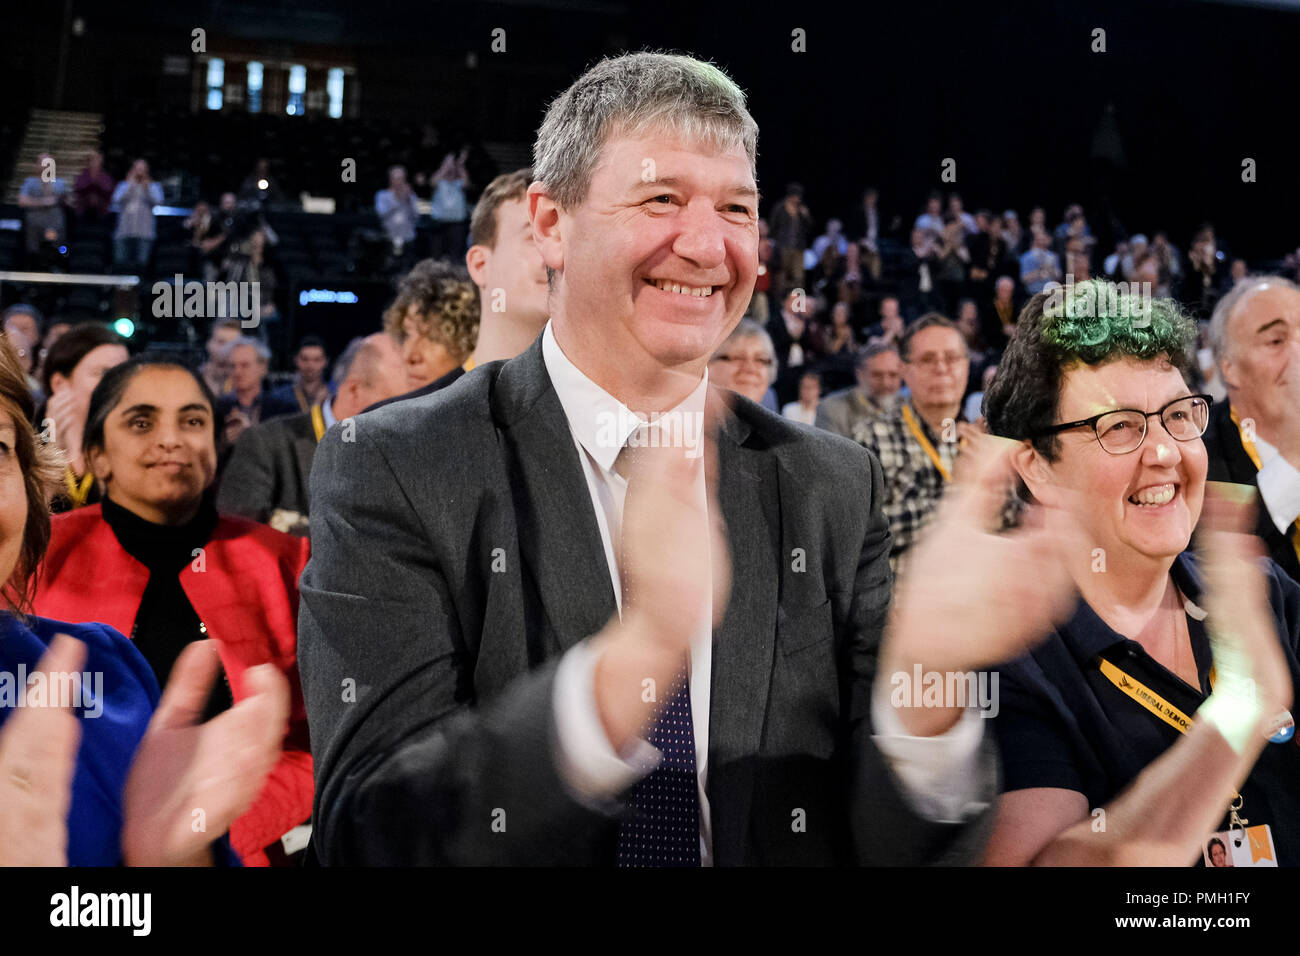 Brighton, UK. 18th September 2018. Willie Rennie is applauded following his speech to the Liberal Democrat Autumn Conference  on Tuesday 18 September 2018 held at Brighton Centre, Sussex. Pictured:  Alistair Carmichael, Commons Chief Whip, Liberal Democrat Spokesperson for Northern Ireland , MP for Orkney and Shetland, and , Menzies Campbell, Liberal Democrat Spokesperson on Defence, congratulate Willie following his speech. Picture by Julie Edwards. Credit: Julie Edwards/Alamy Live News Stock Photo